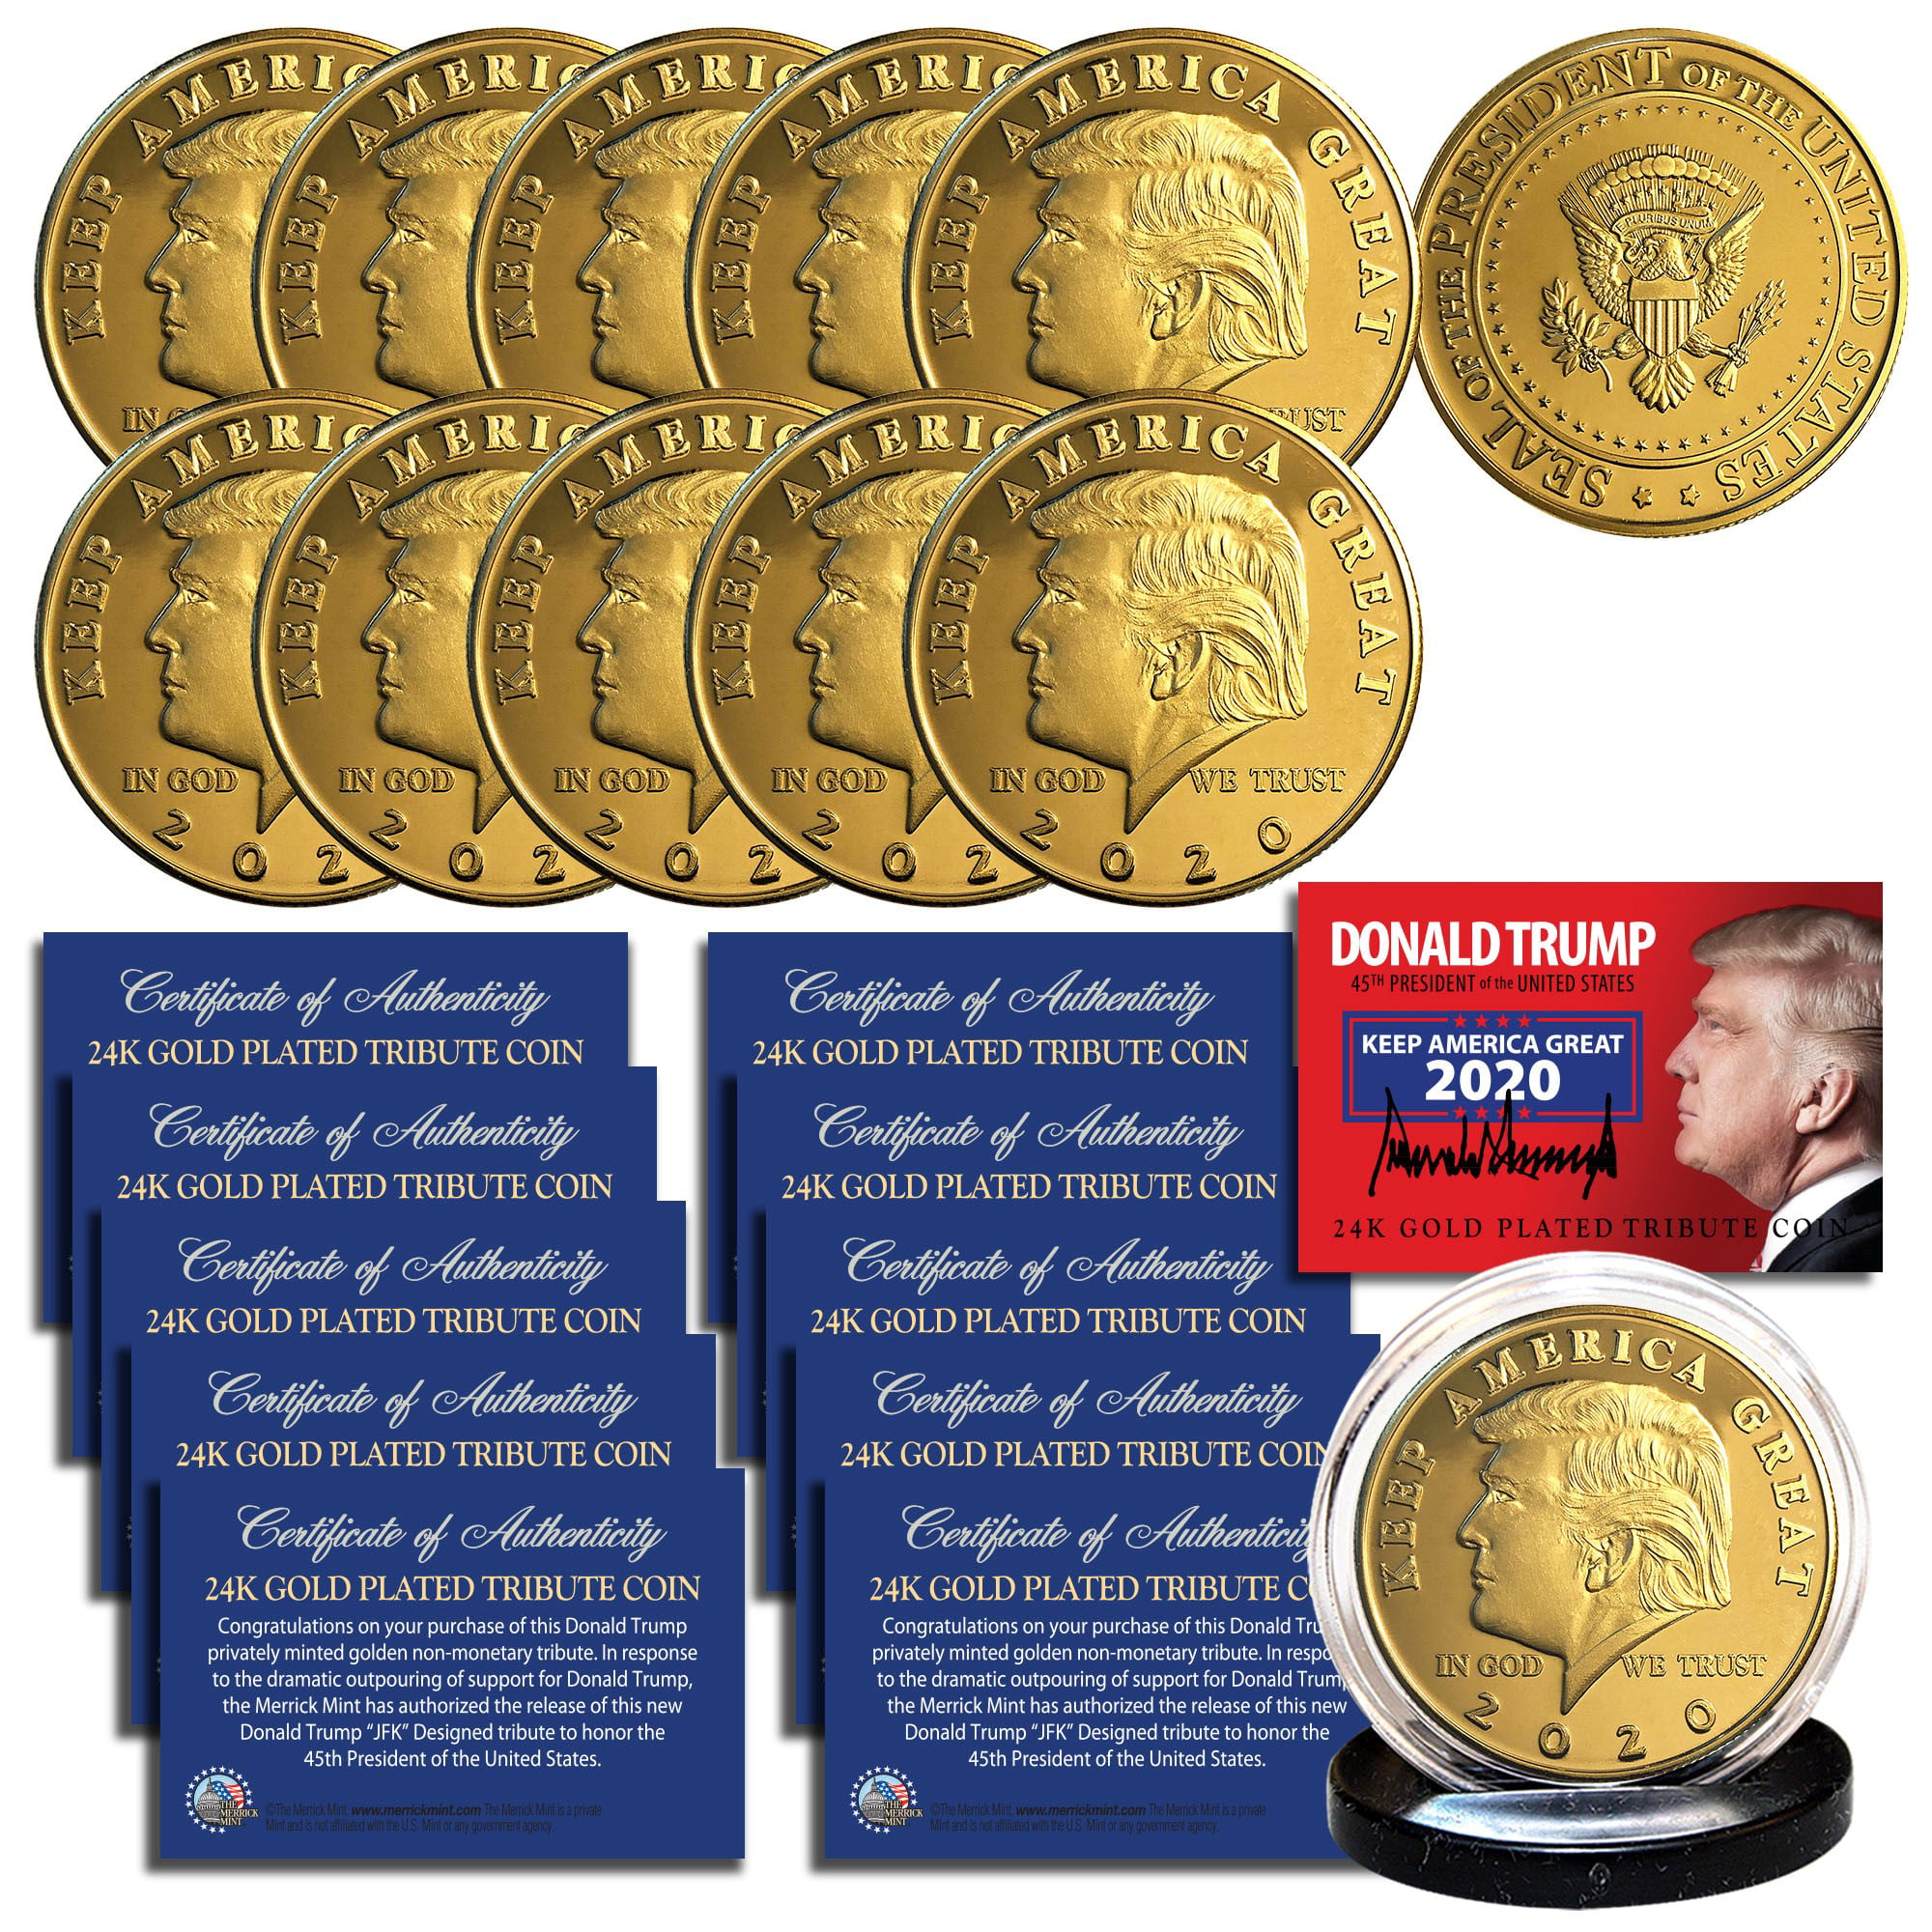 Donald Trump 2020 Keep America Great Challenge Coin 2-Tone Gold With Silver Face 